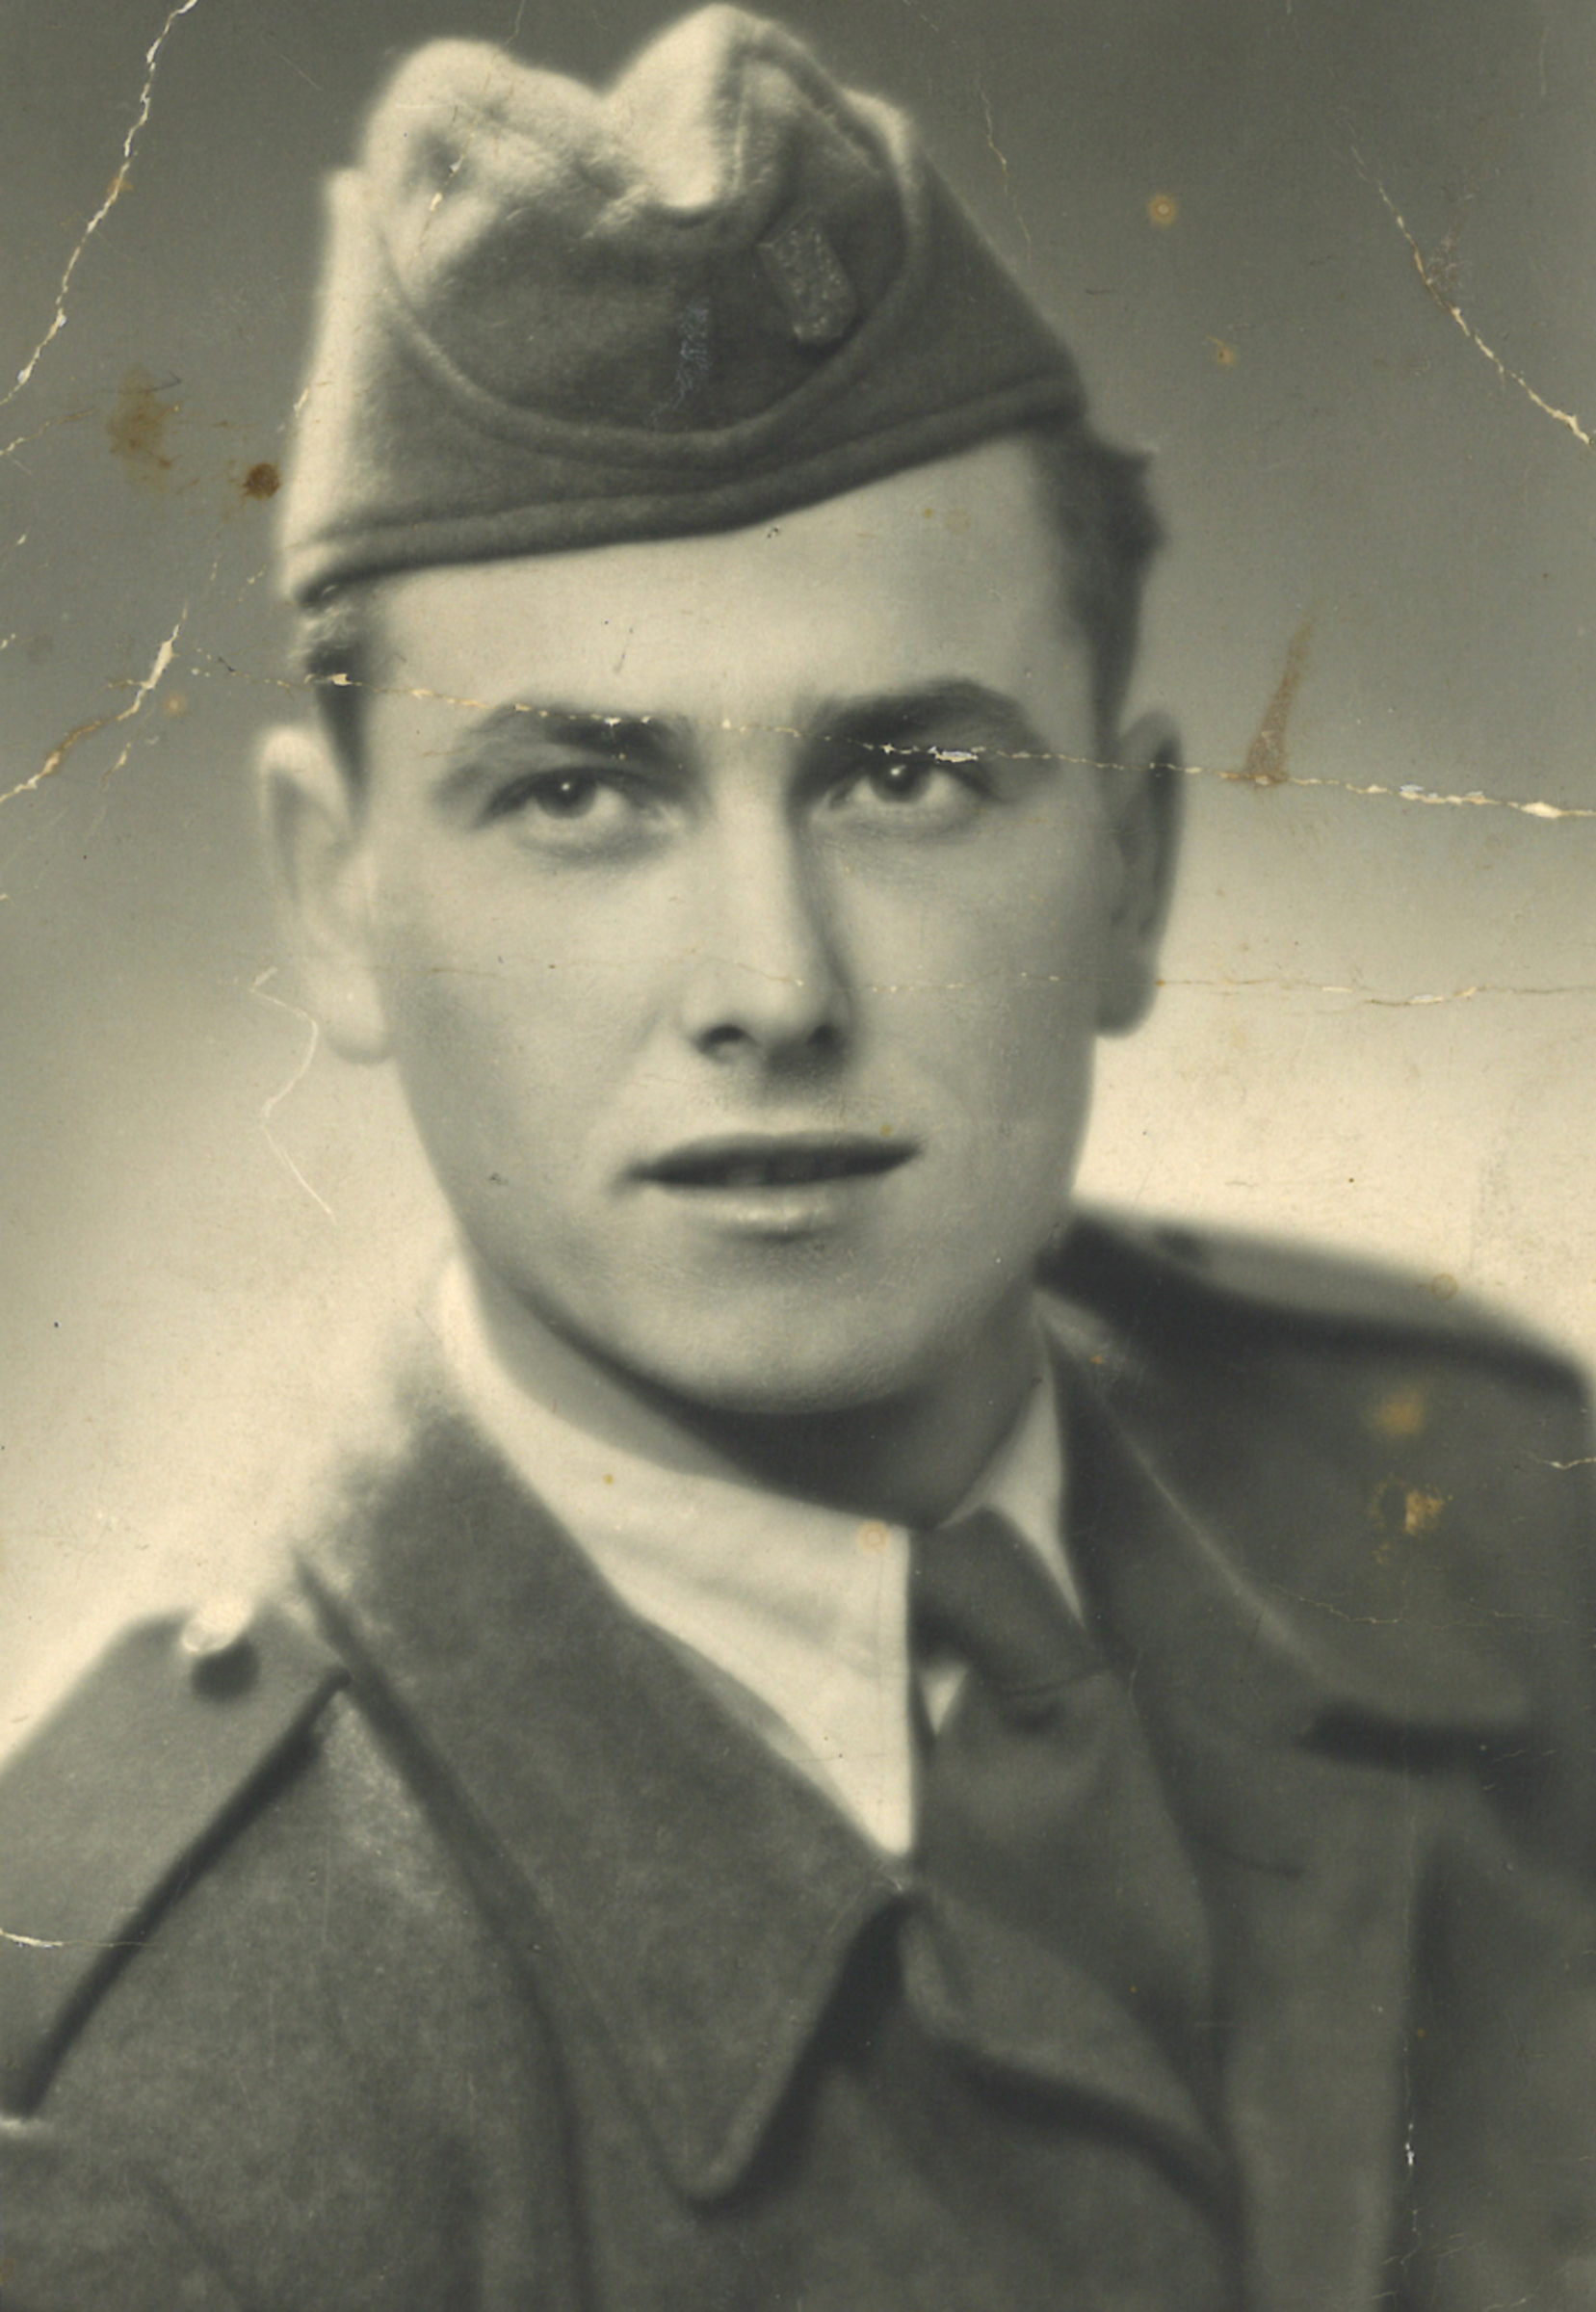 Picture of a young soldier